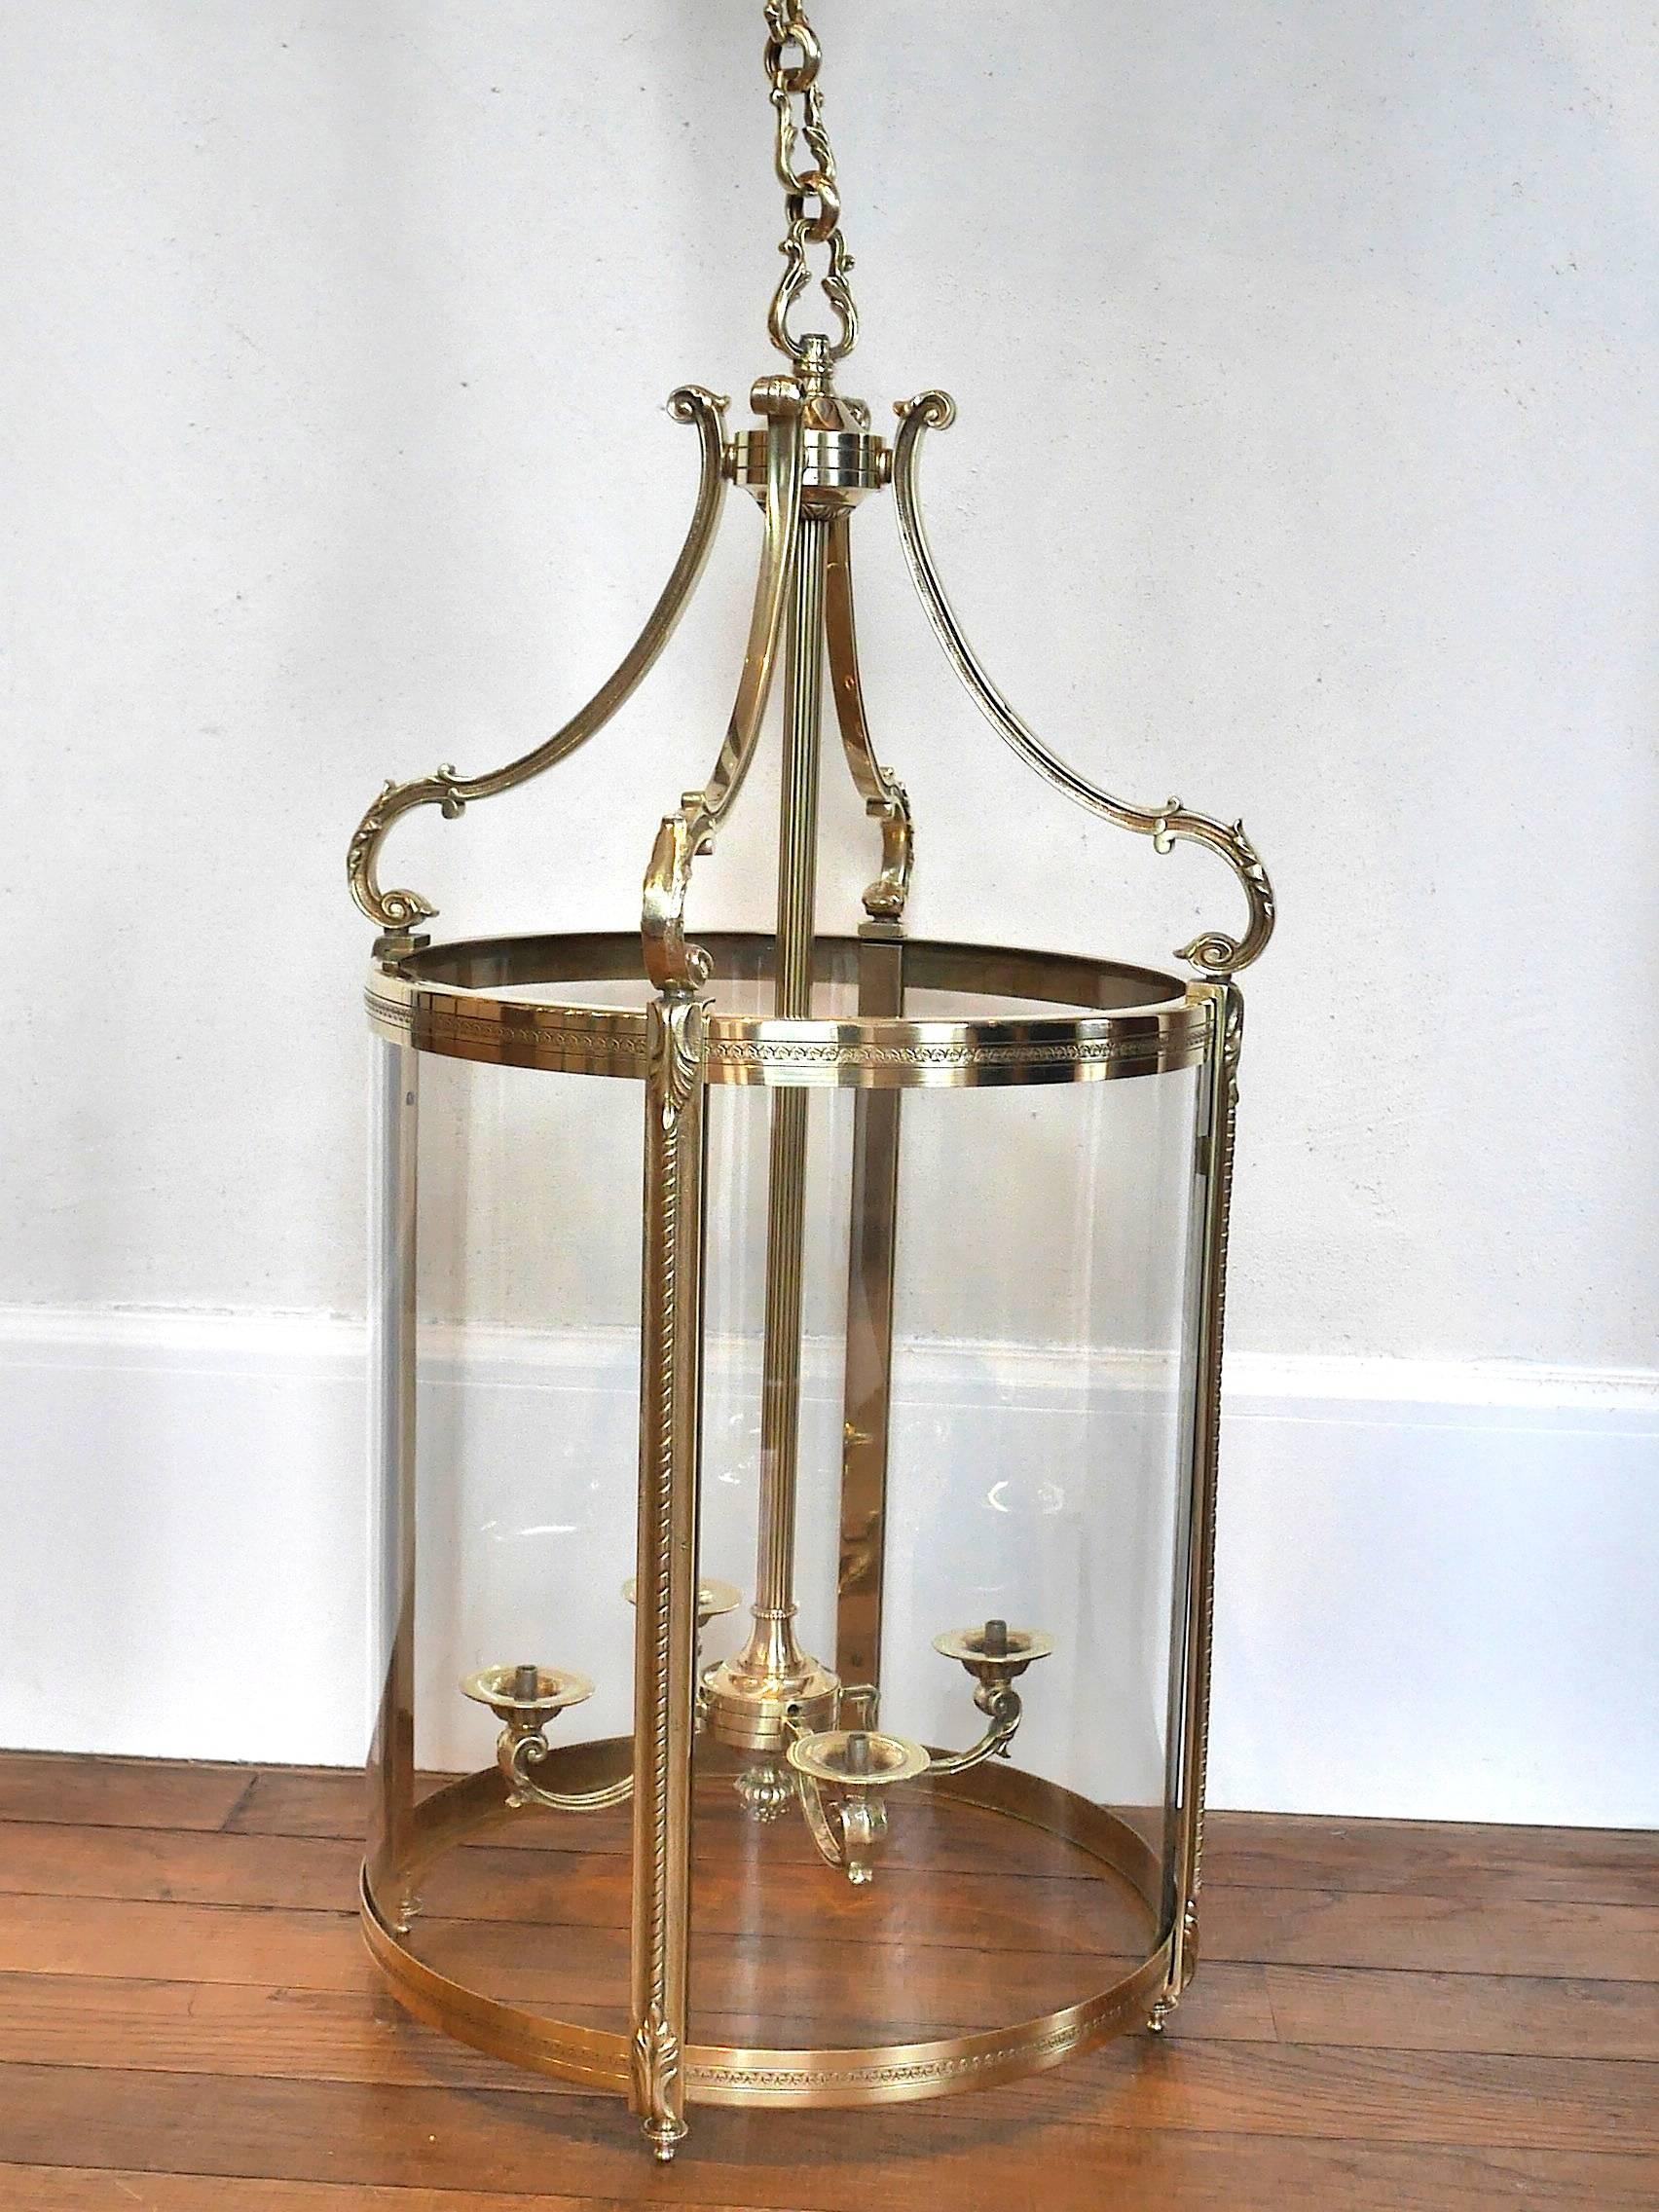 Brass lantern, with four supports for lamps.